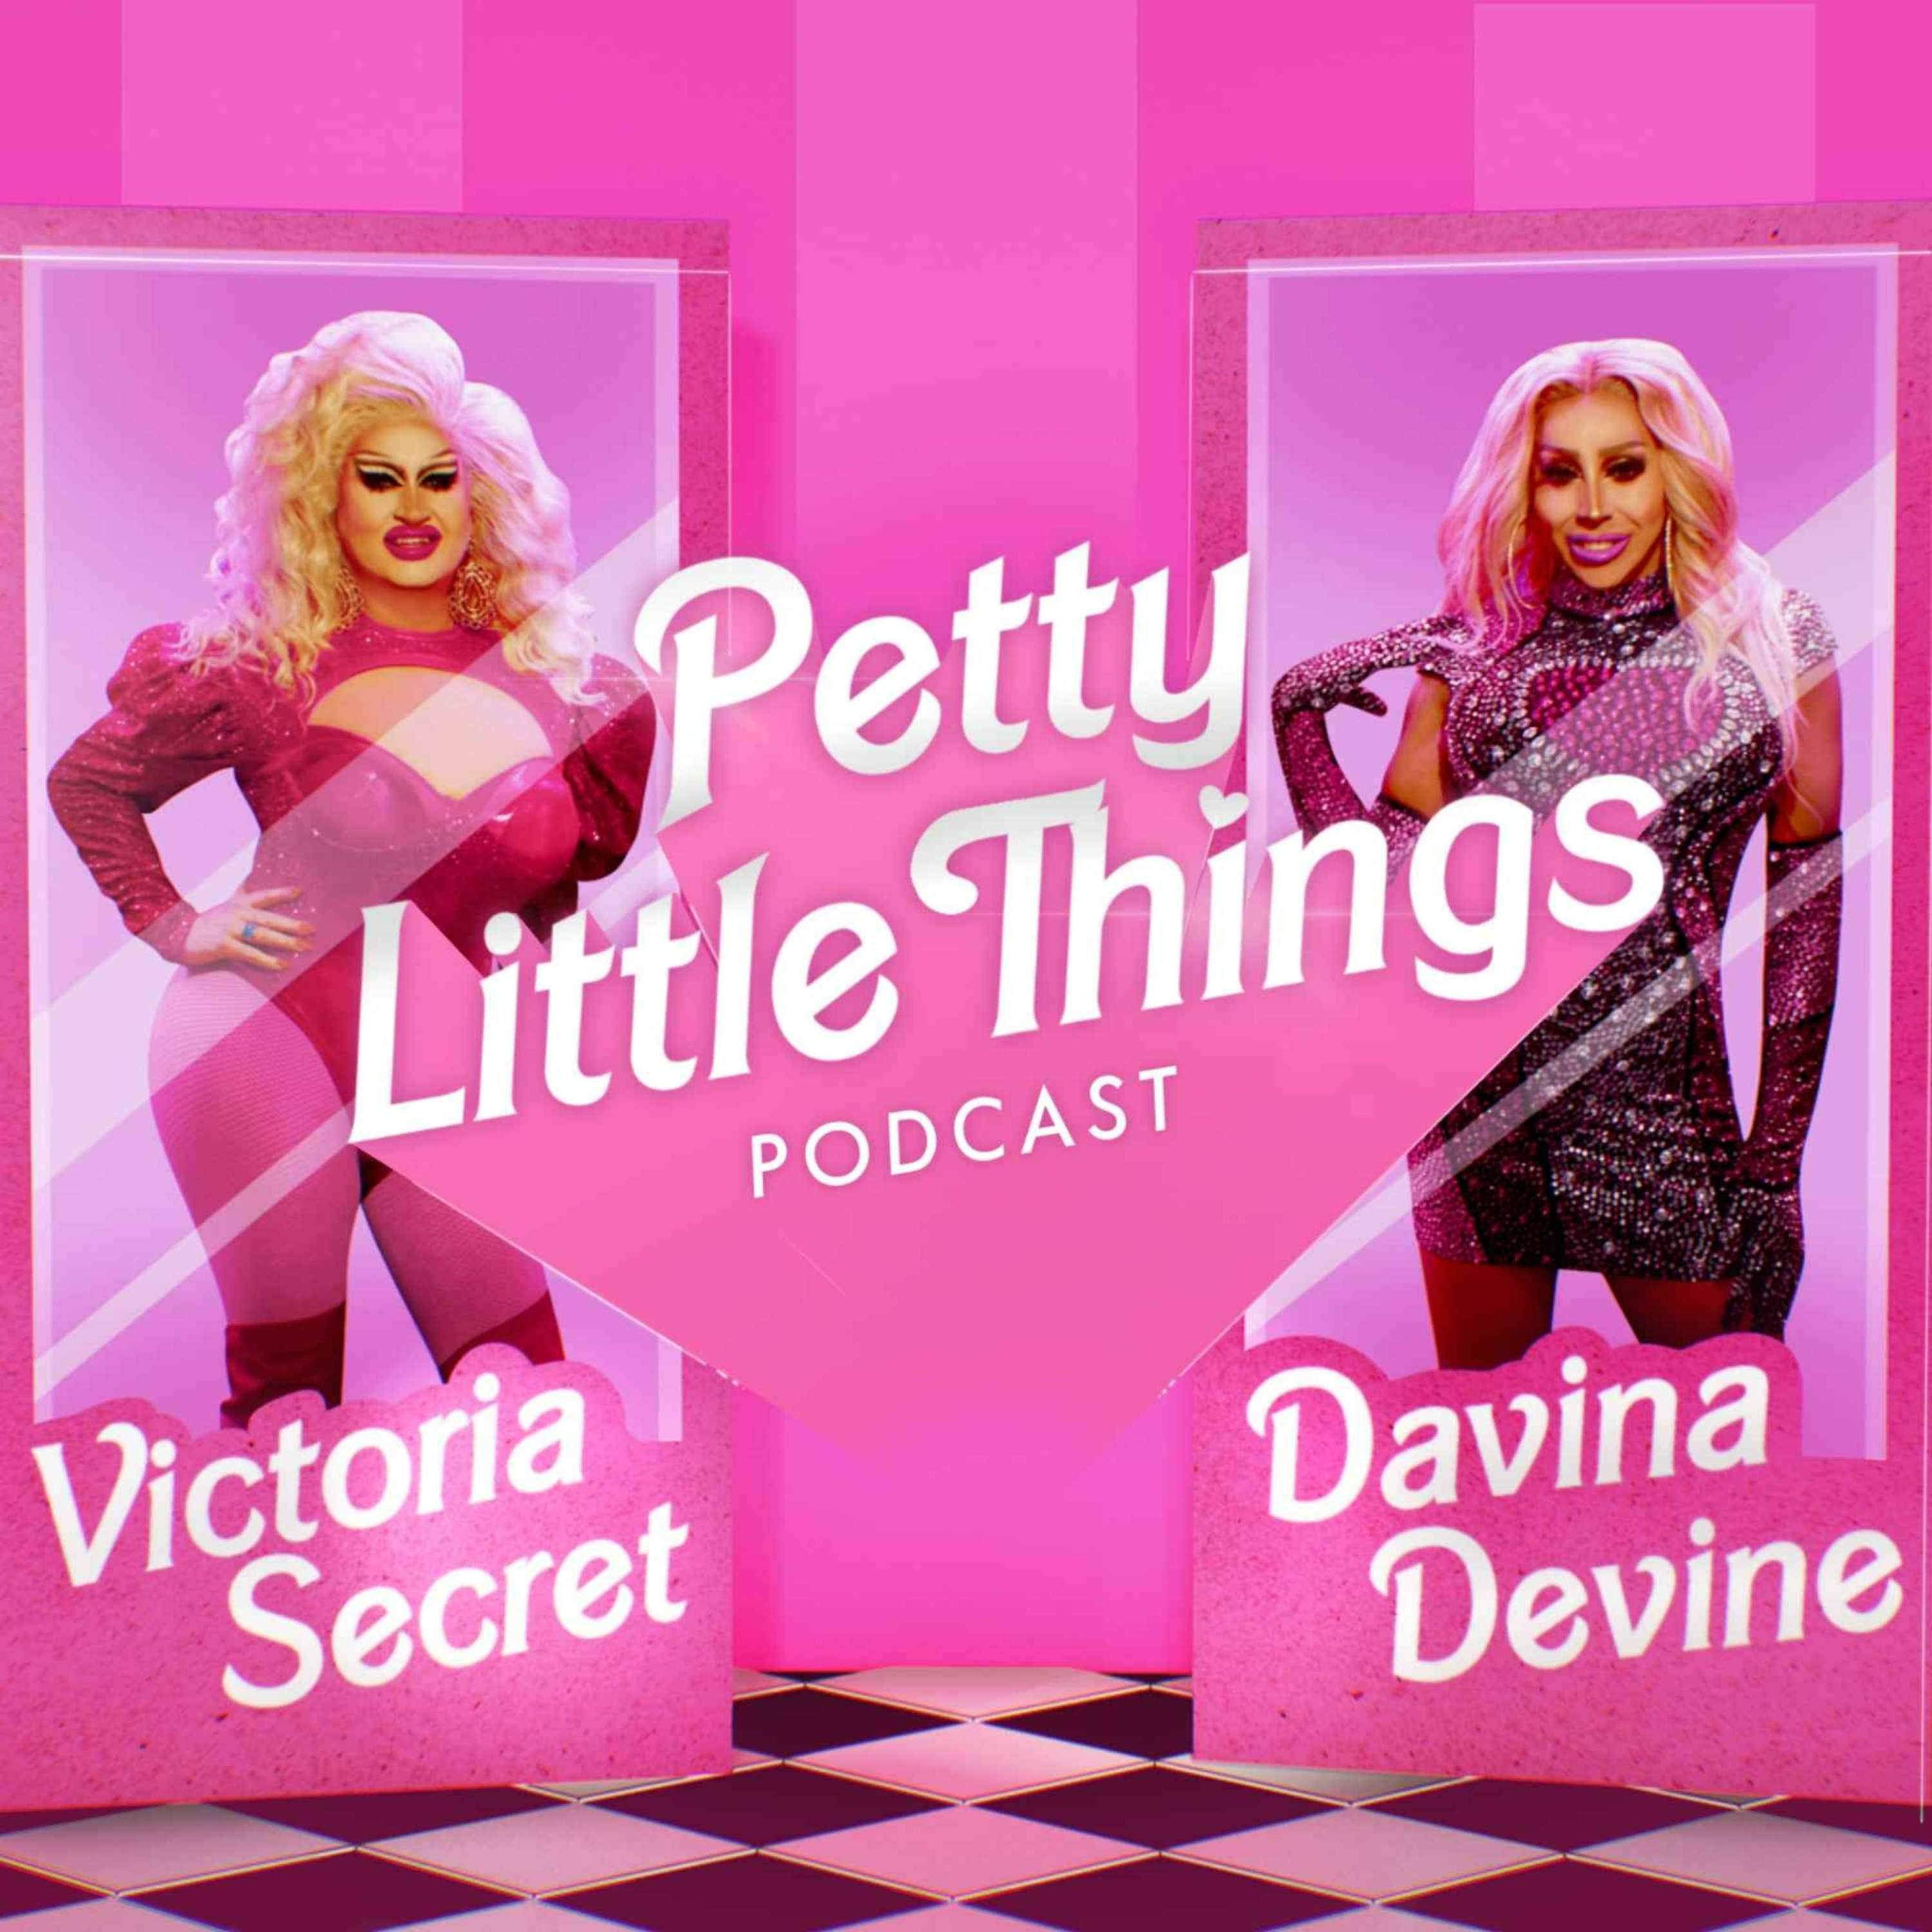 Petty Little Things podcast show image